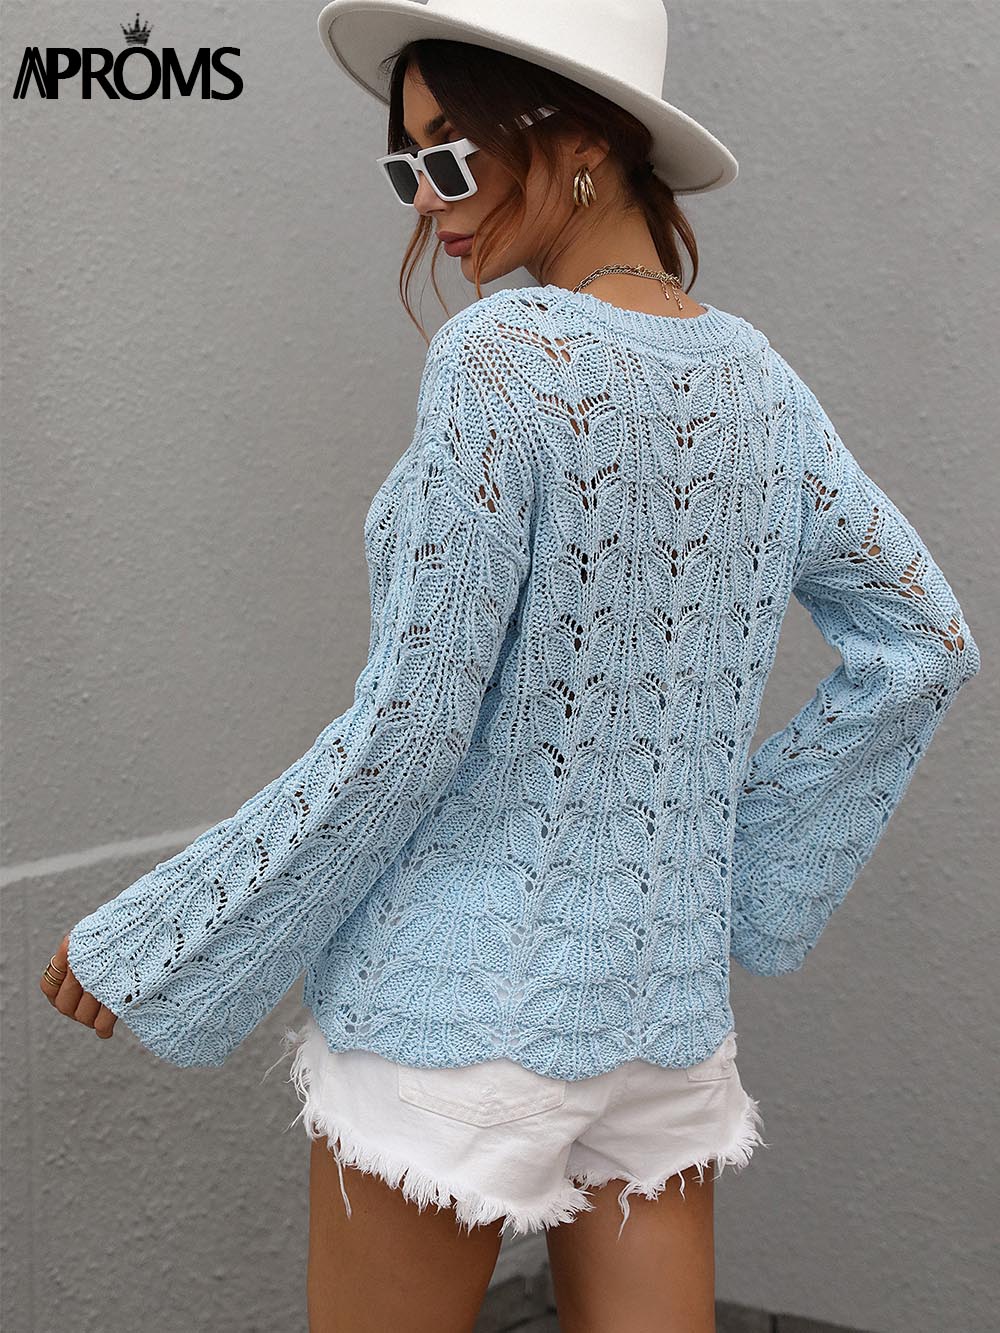 Aproms-Elegant-Solid-Basic-Crochet-Knit-Pullovers-Women-s-Relaxed-Fit-Jumpers-2022-Female-Casual-Long-5